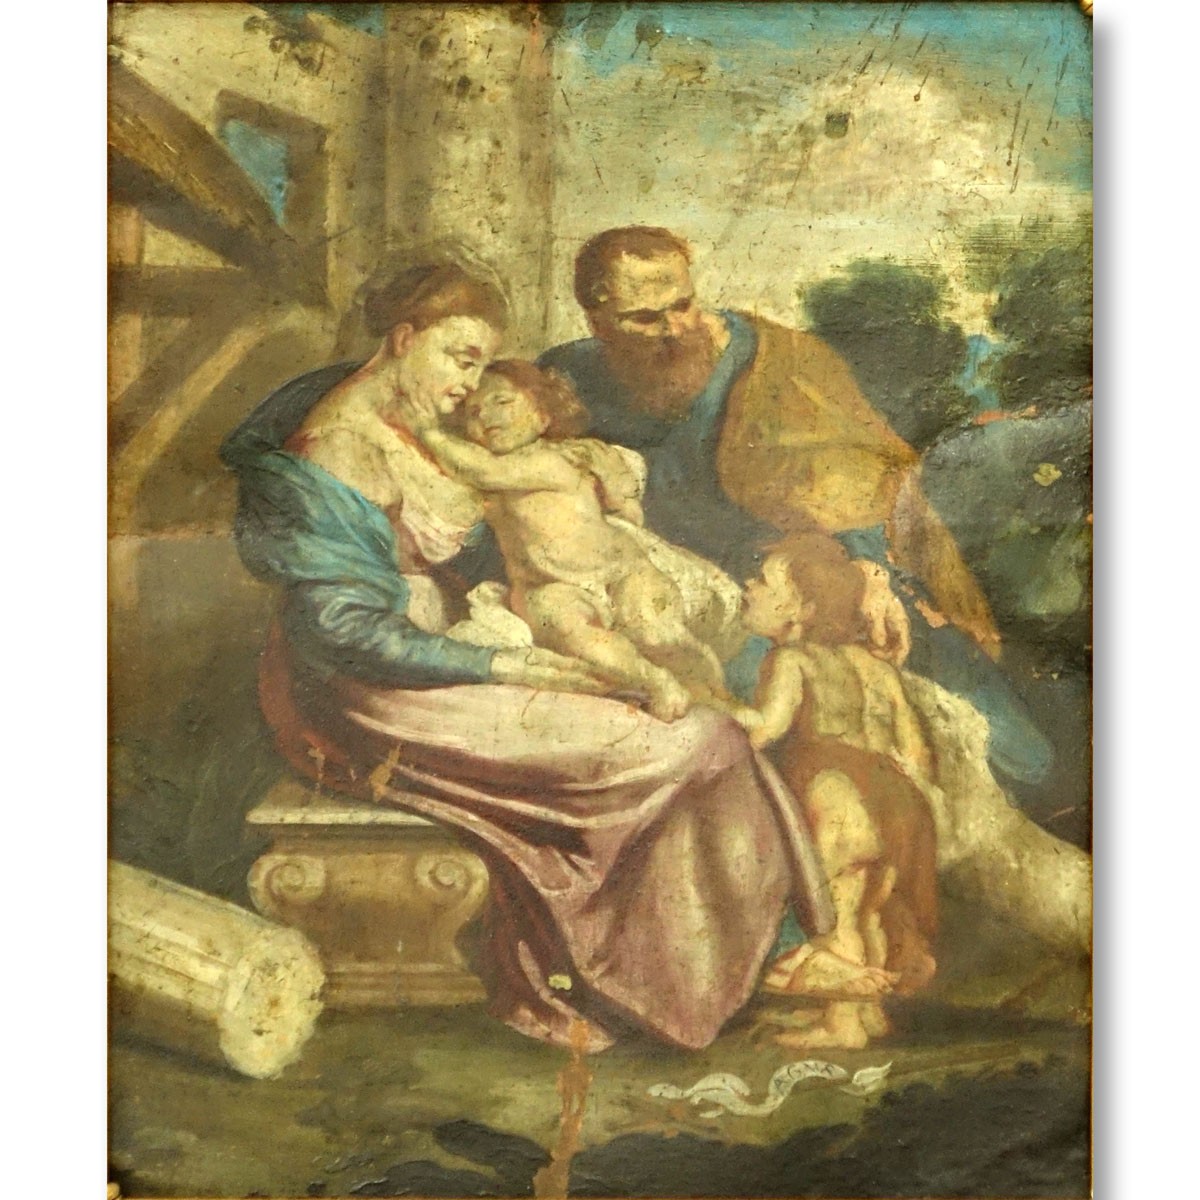 Antique Old Master Oil Painting on Tin, Religious Scene at the Italian Ruins. Restoration and paint loss, spotting.